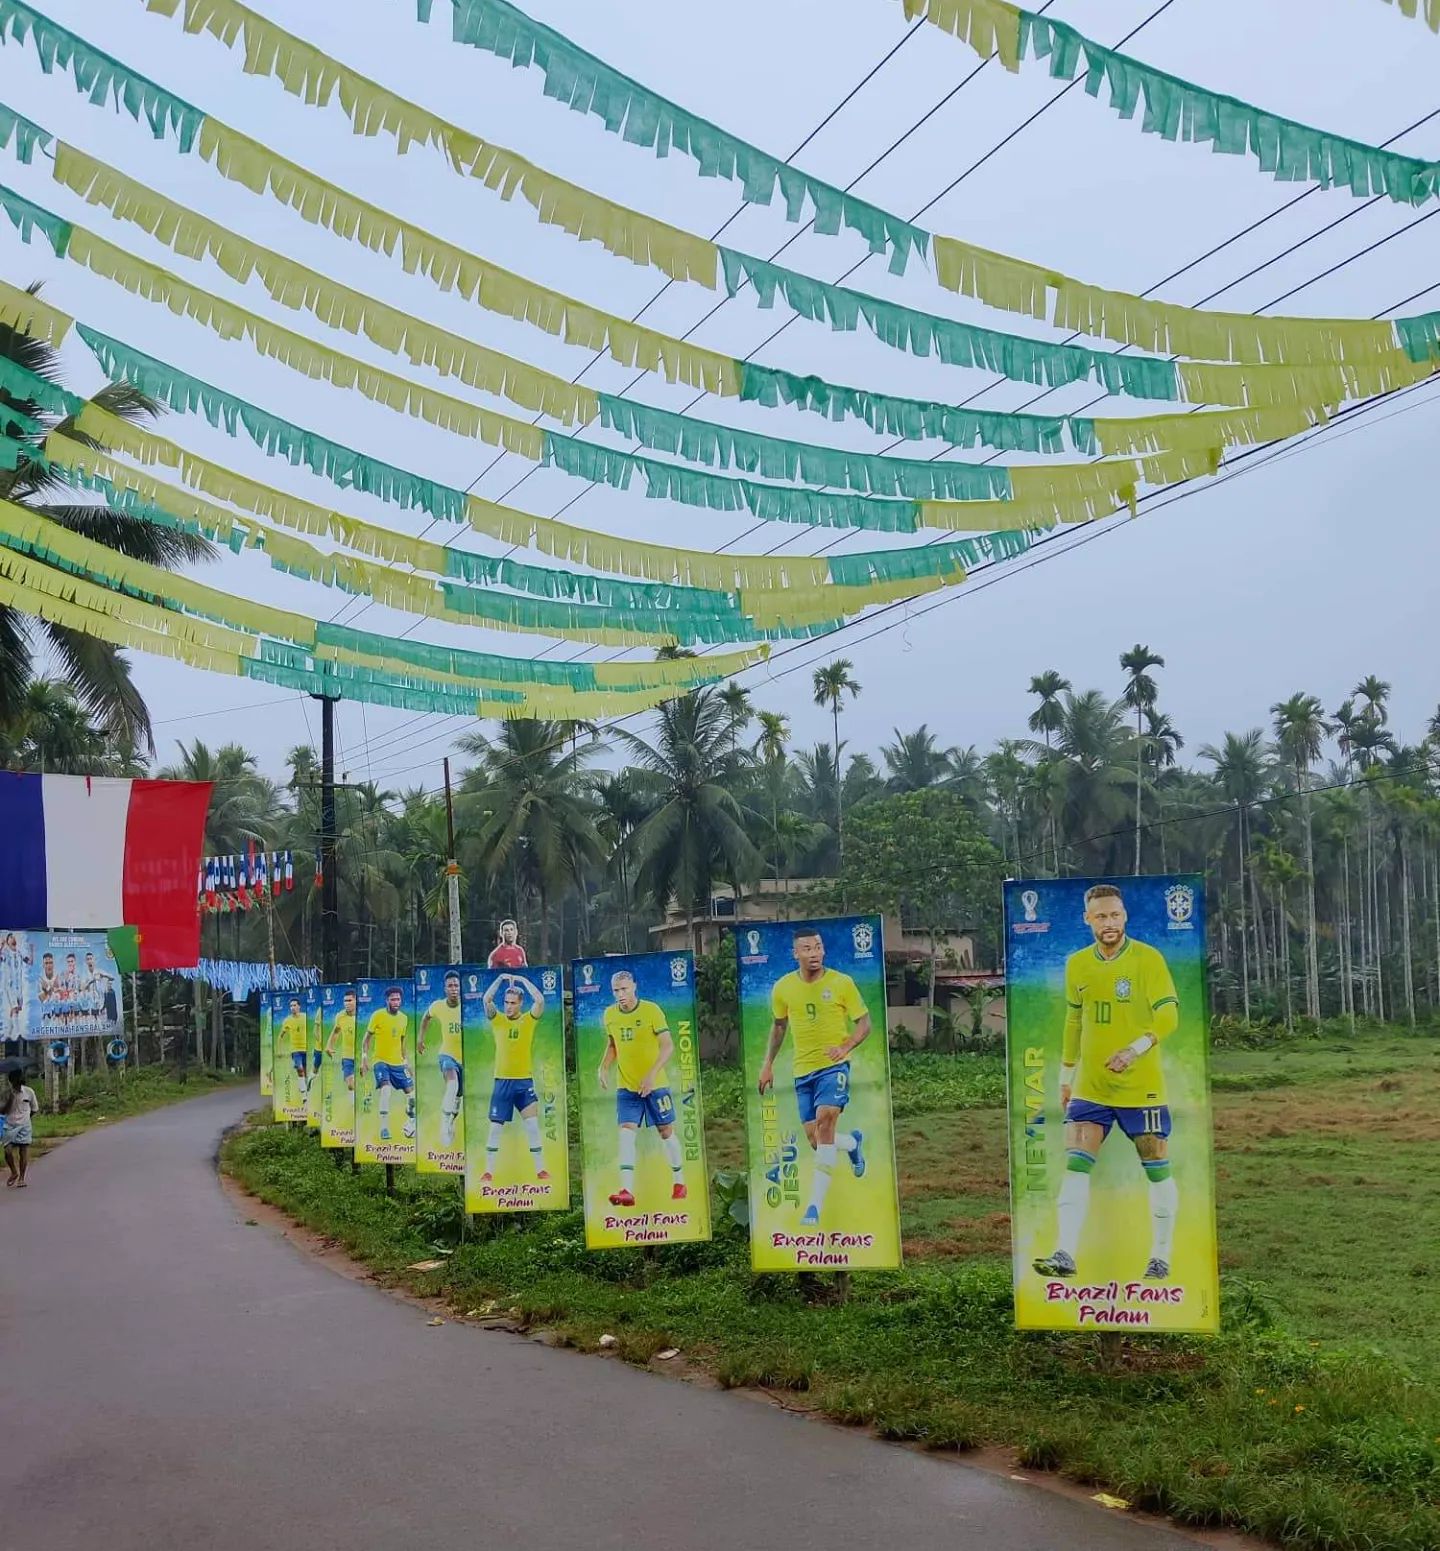 Kerala World Cup frenzy: Ministers place warnings and guidelines to check football fans’ celebrations